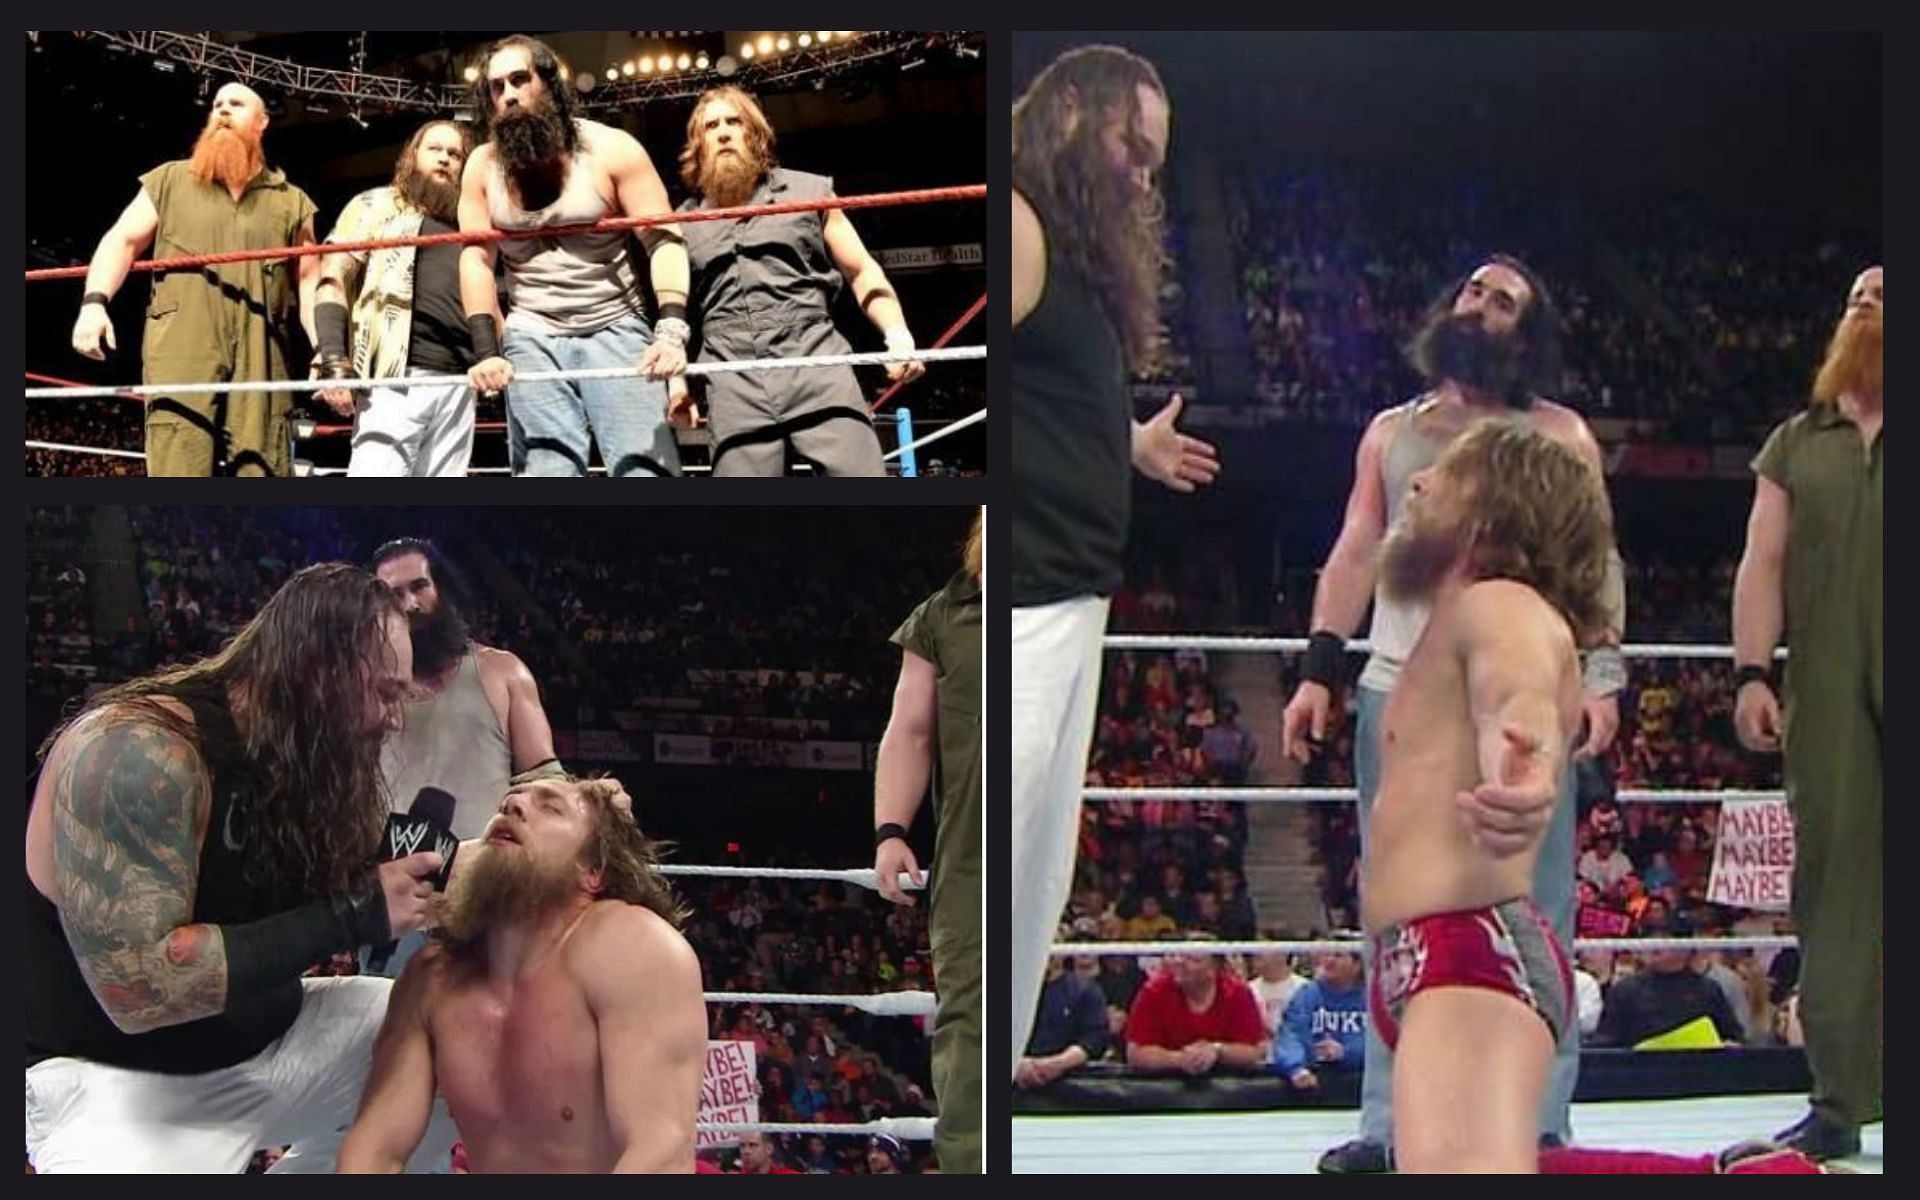 Bryan Danielson joined forces with Erick Rowan, Bray Wyatt and Brodie Lee in 2013